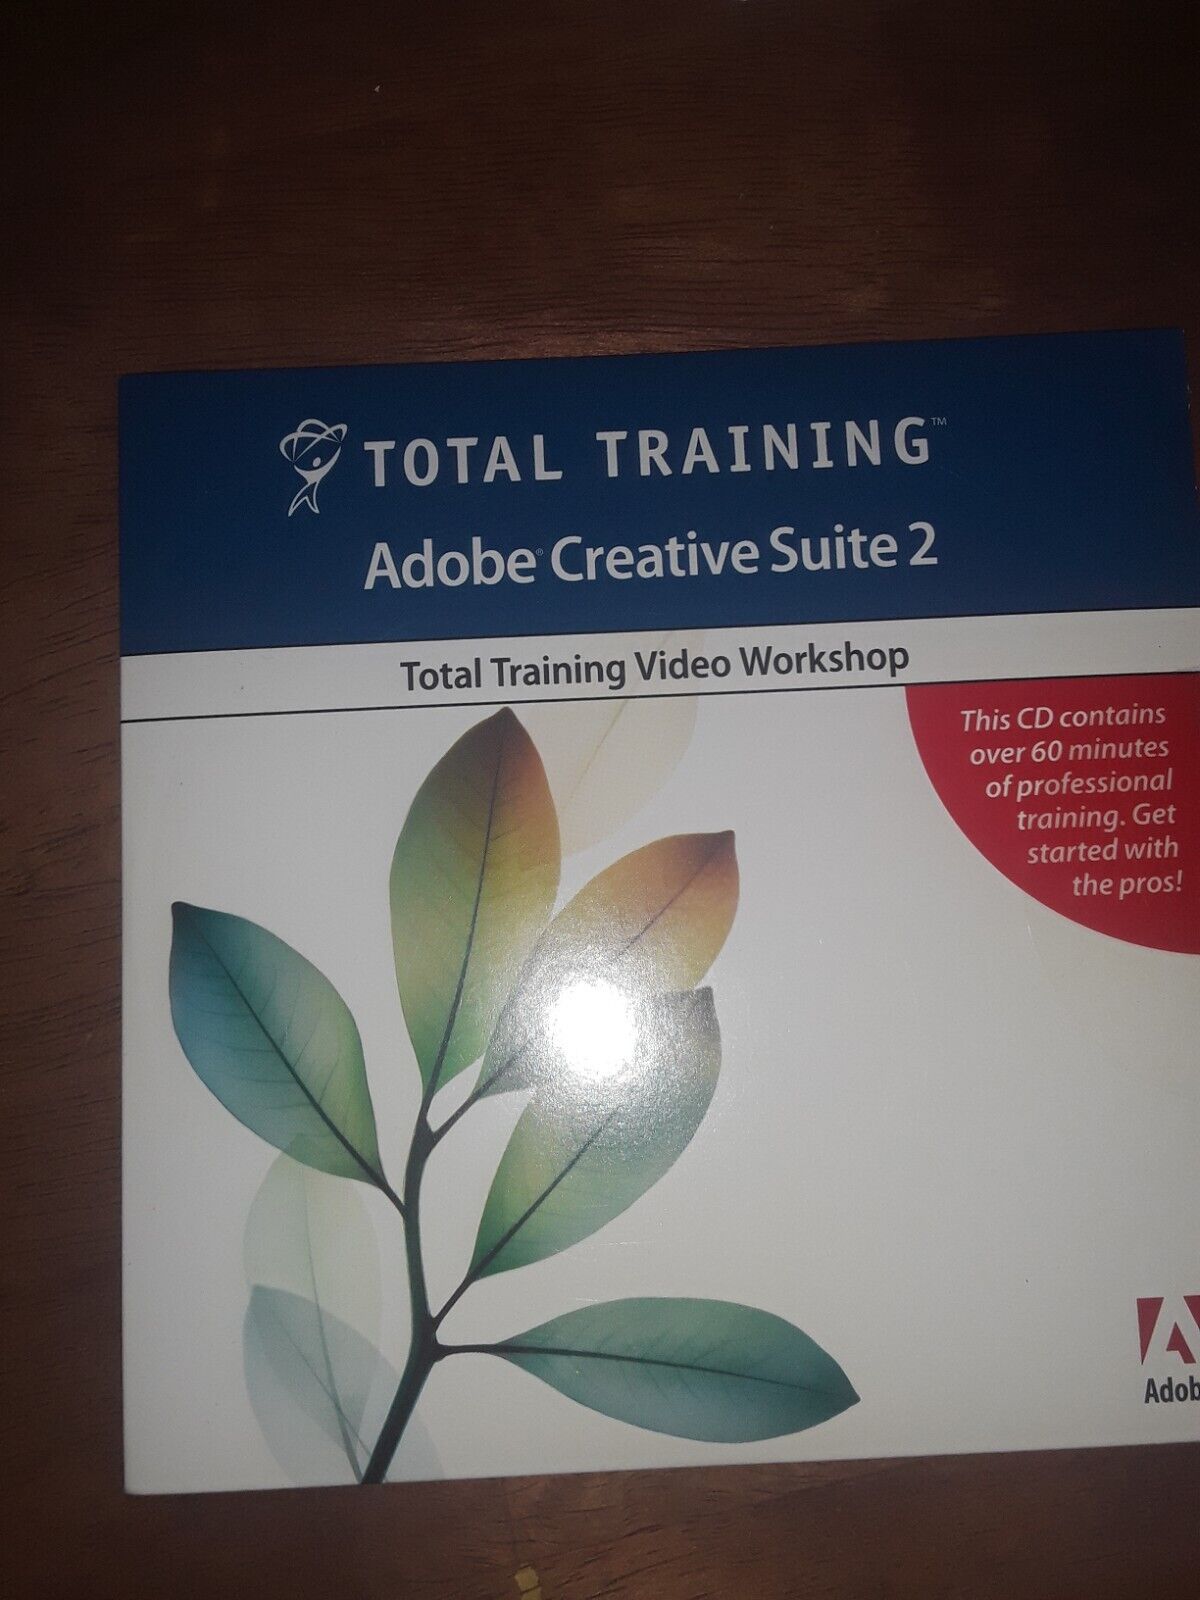 Adobe PhotoShop CS2 for Windows w/ Training Video CD and Guide No Product Key